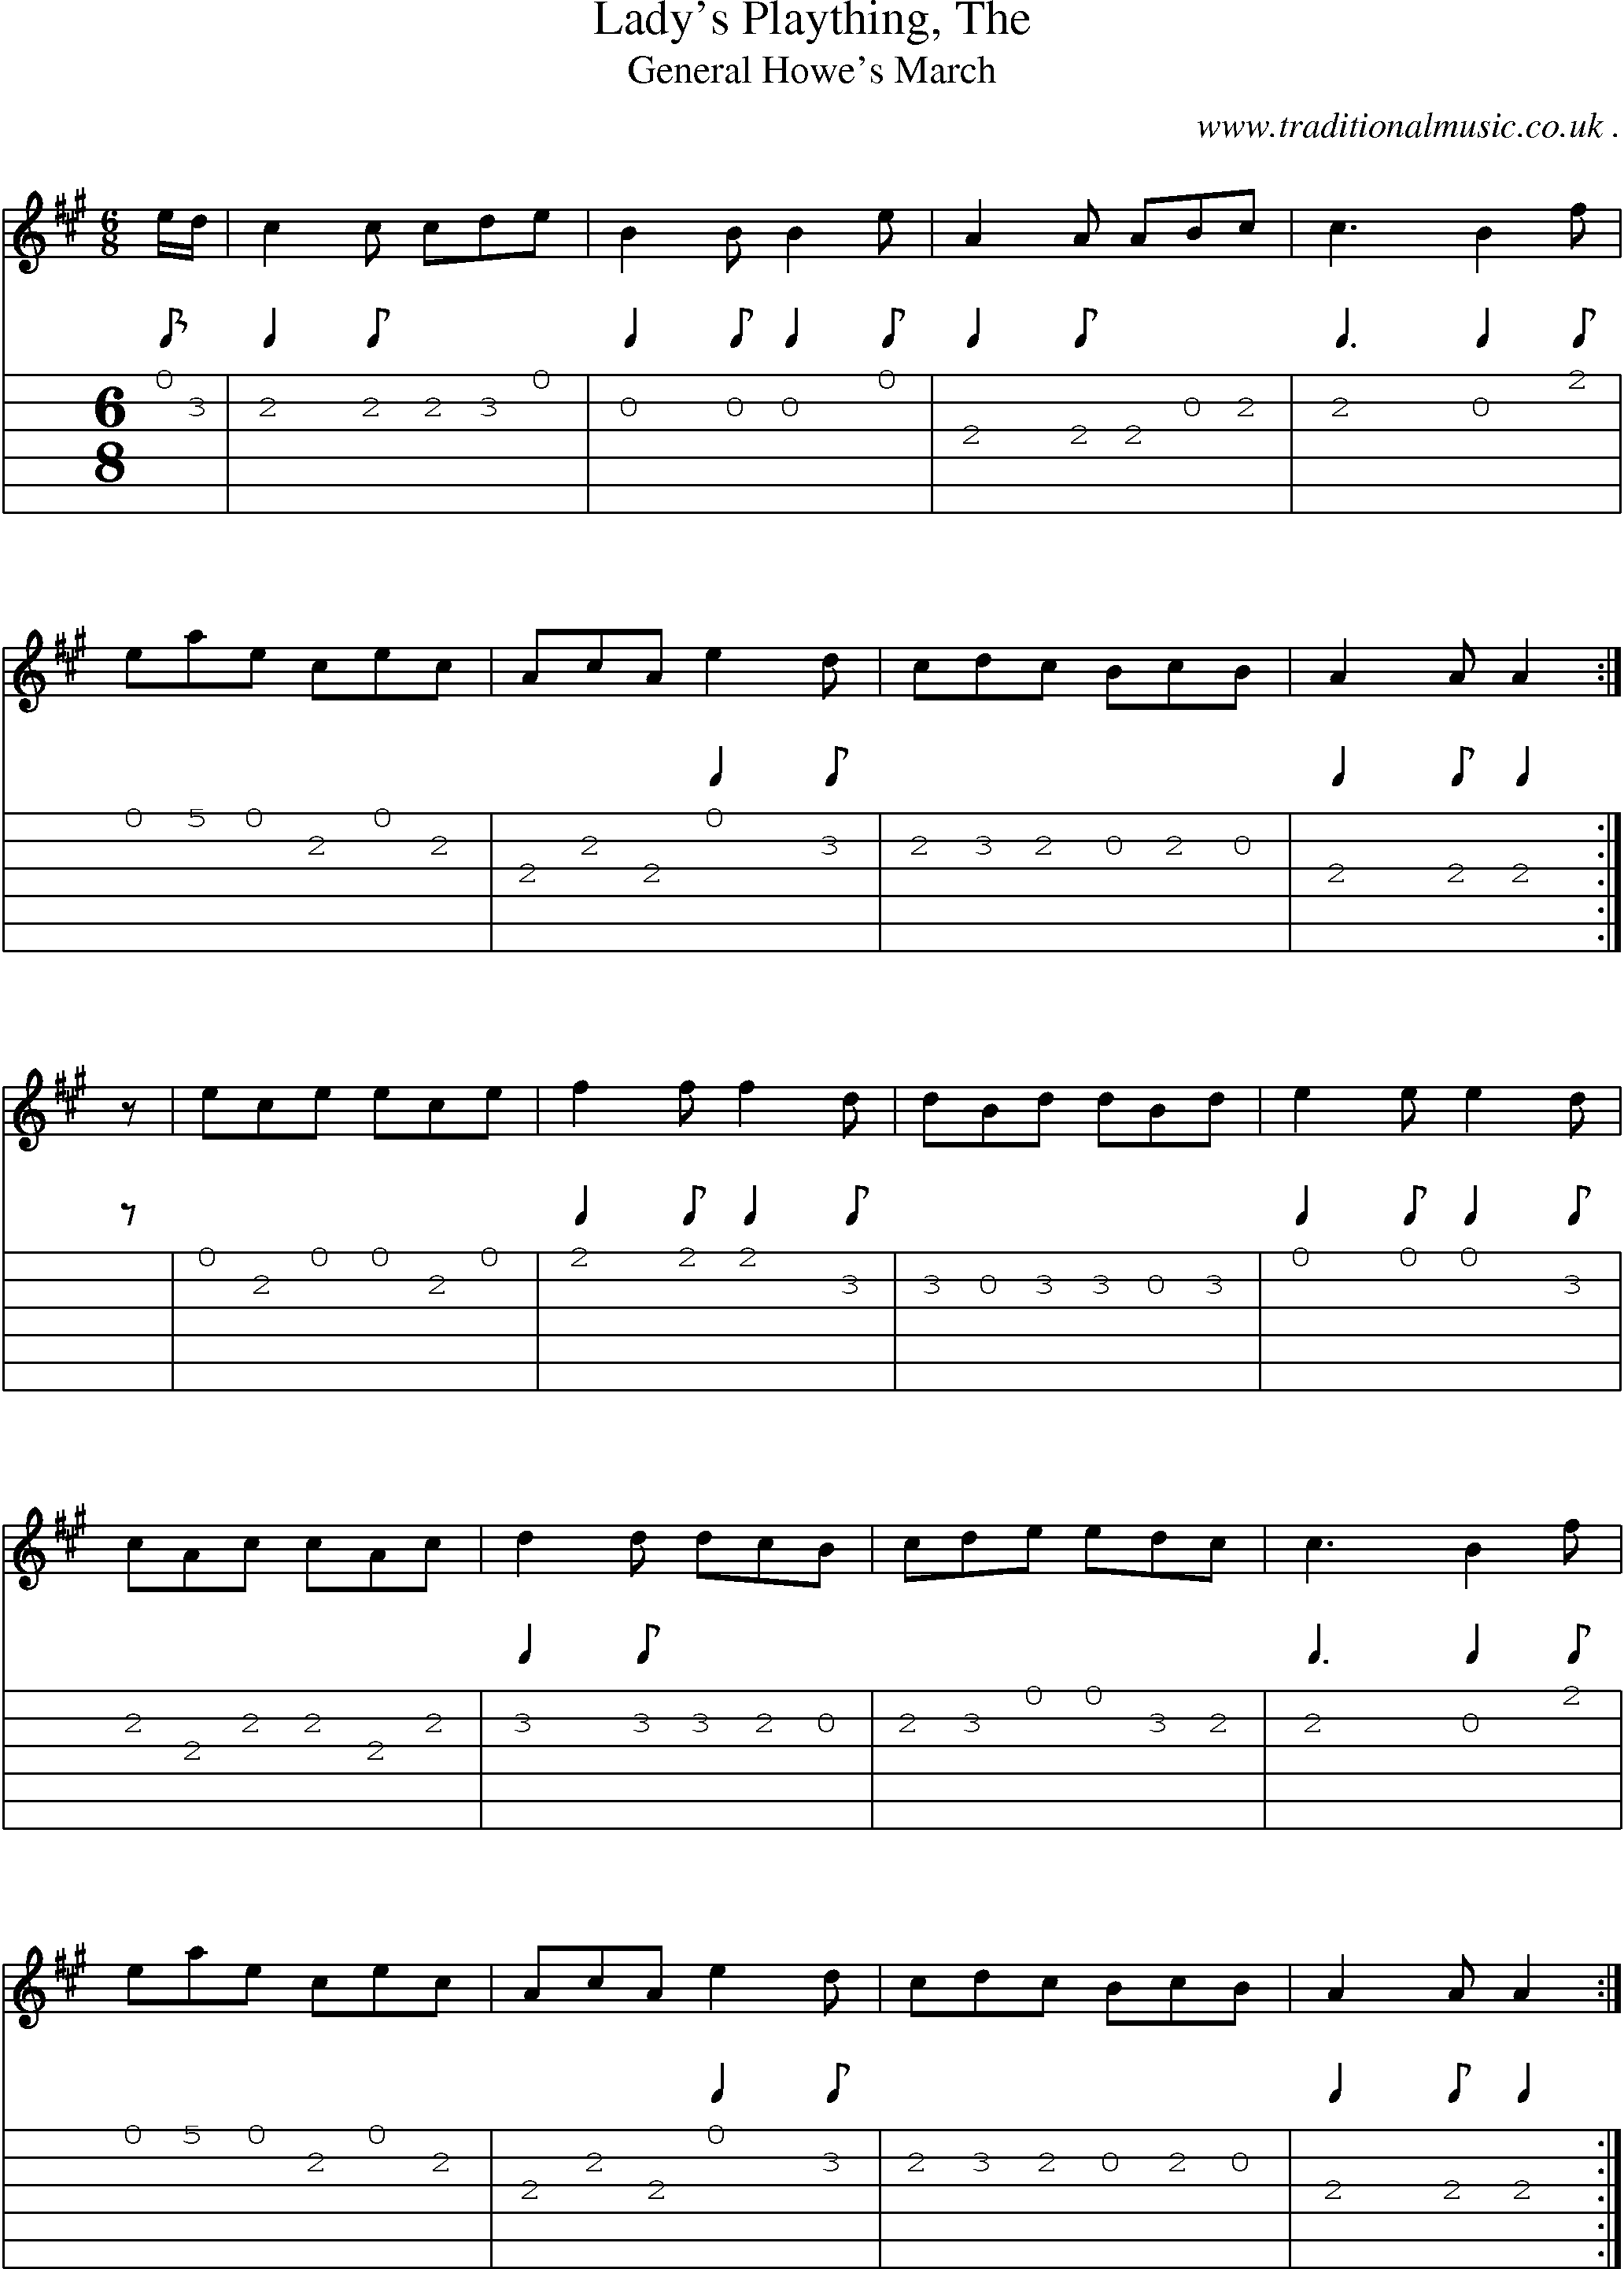 Sheet-music  score, Chords and Guitar Tabs for Ladys Plaything The